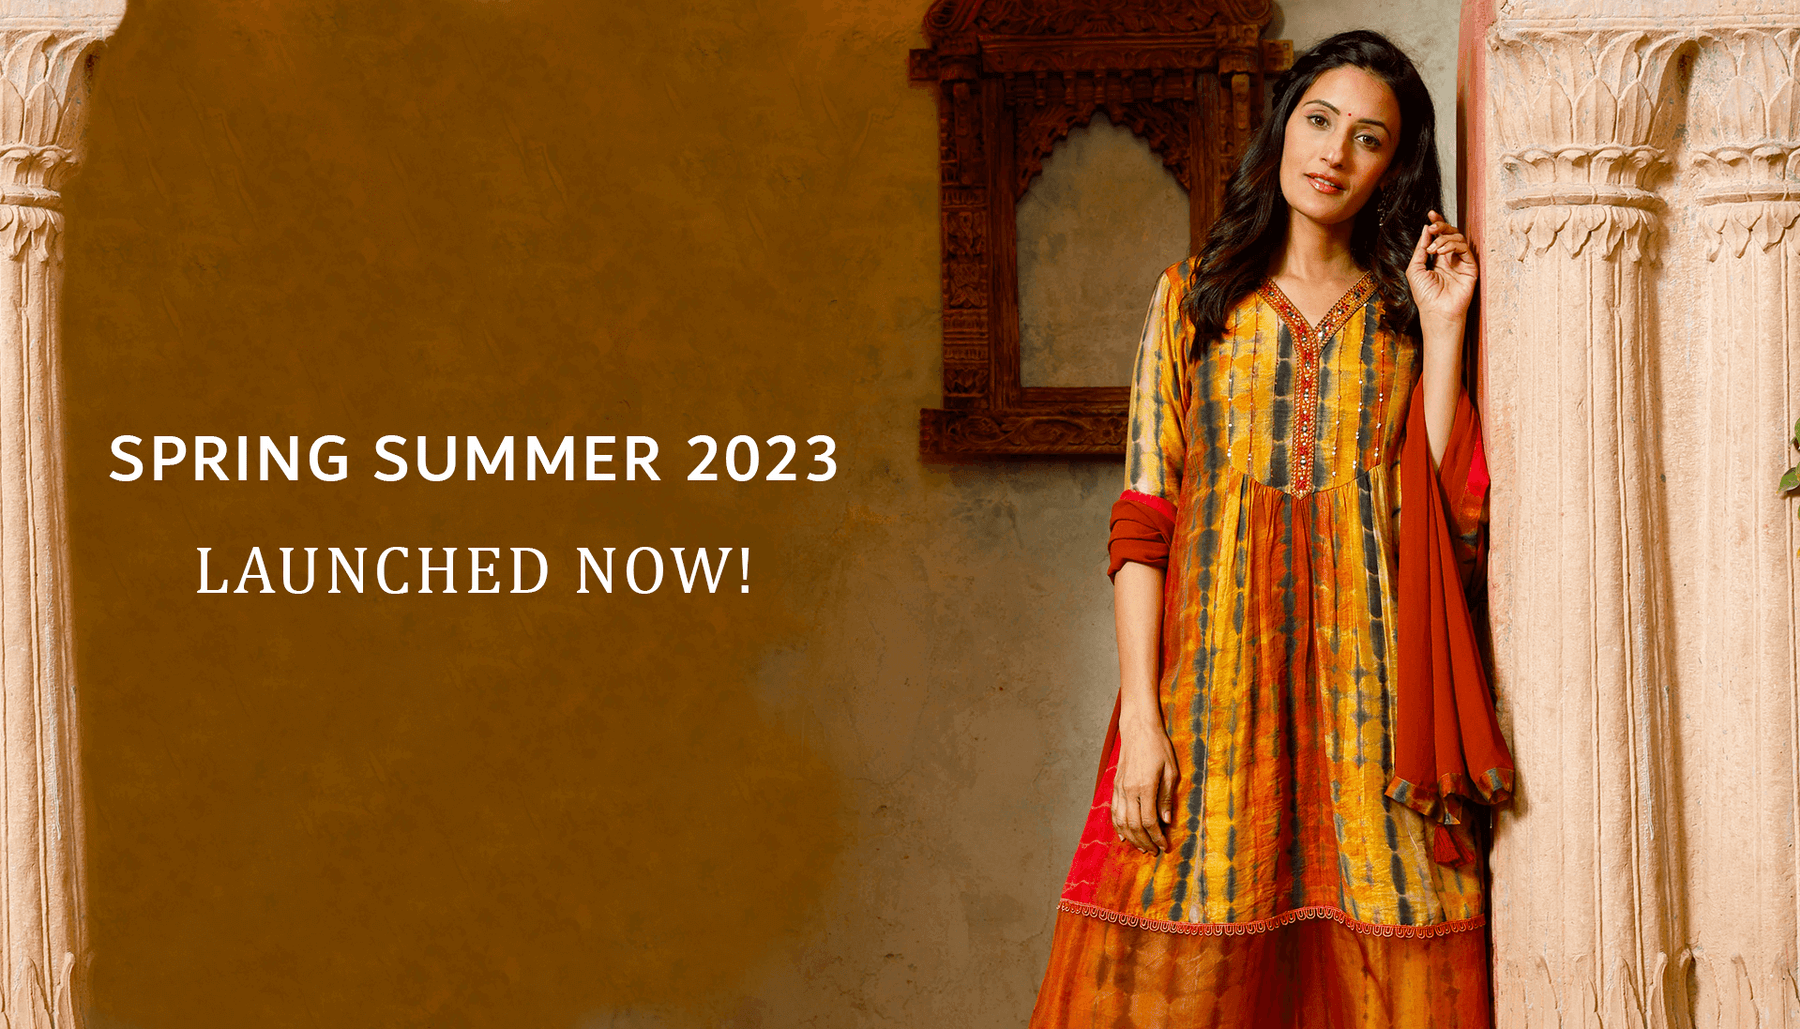 Shree’s Spring Summer 2023 Launched NOW